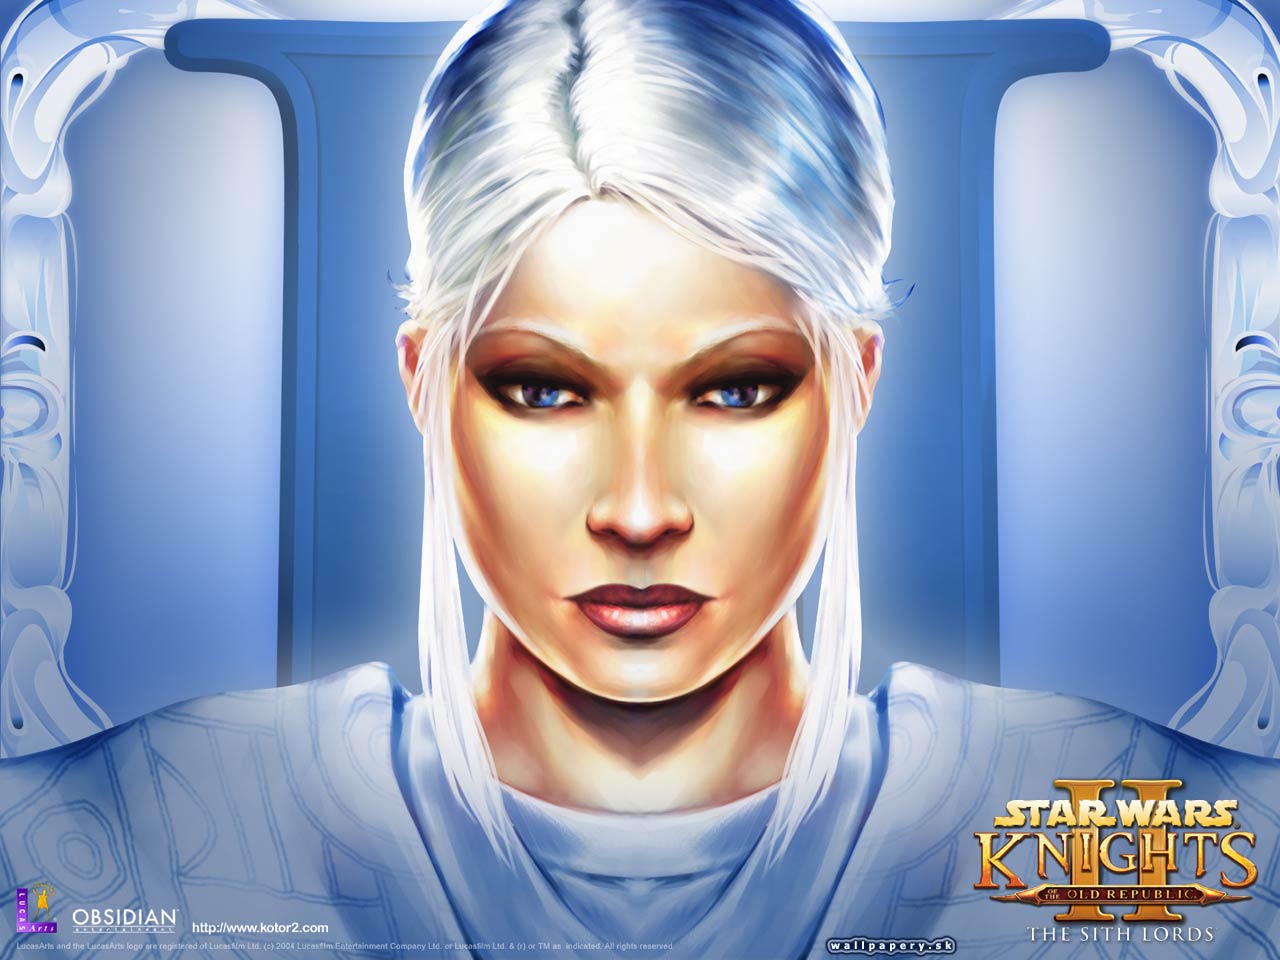 Star Wars: Knights of the Old Republic 2: The Sith Lords - wallpaper 2